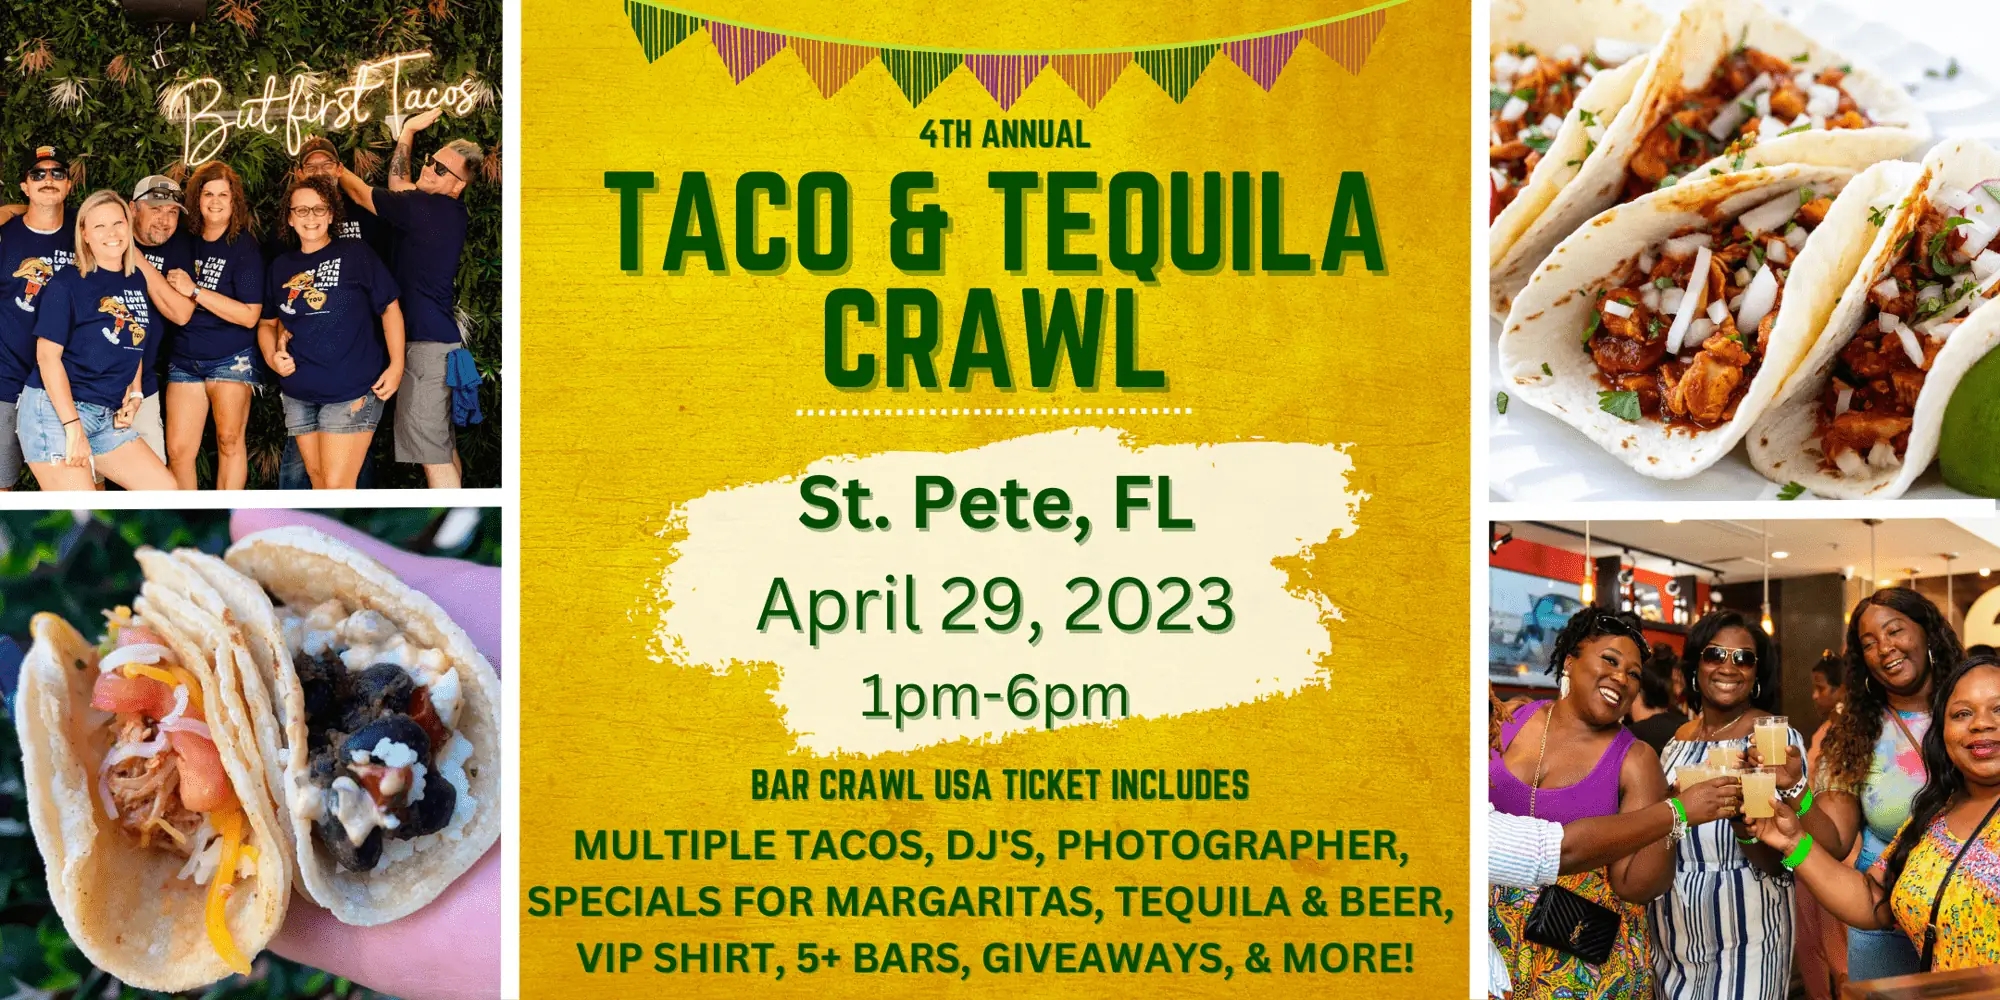 promo : the Taco And Tequila Crawl in Saint Petersburg